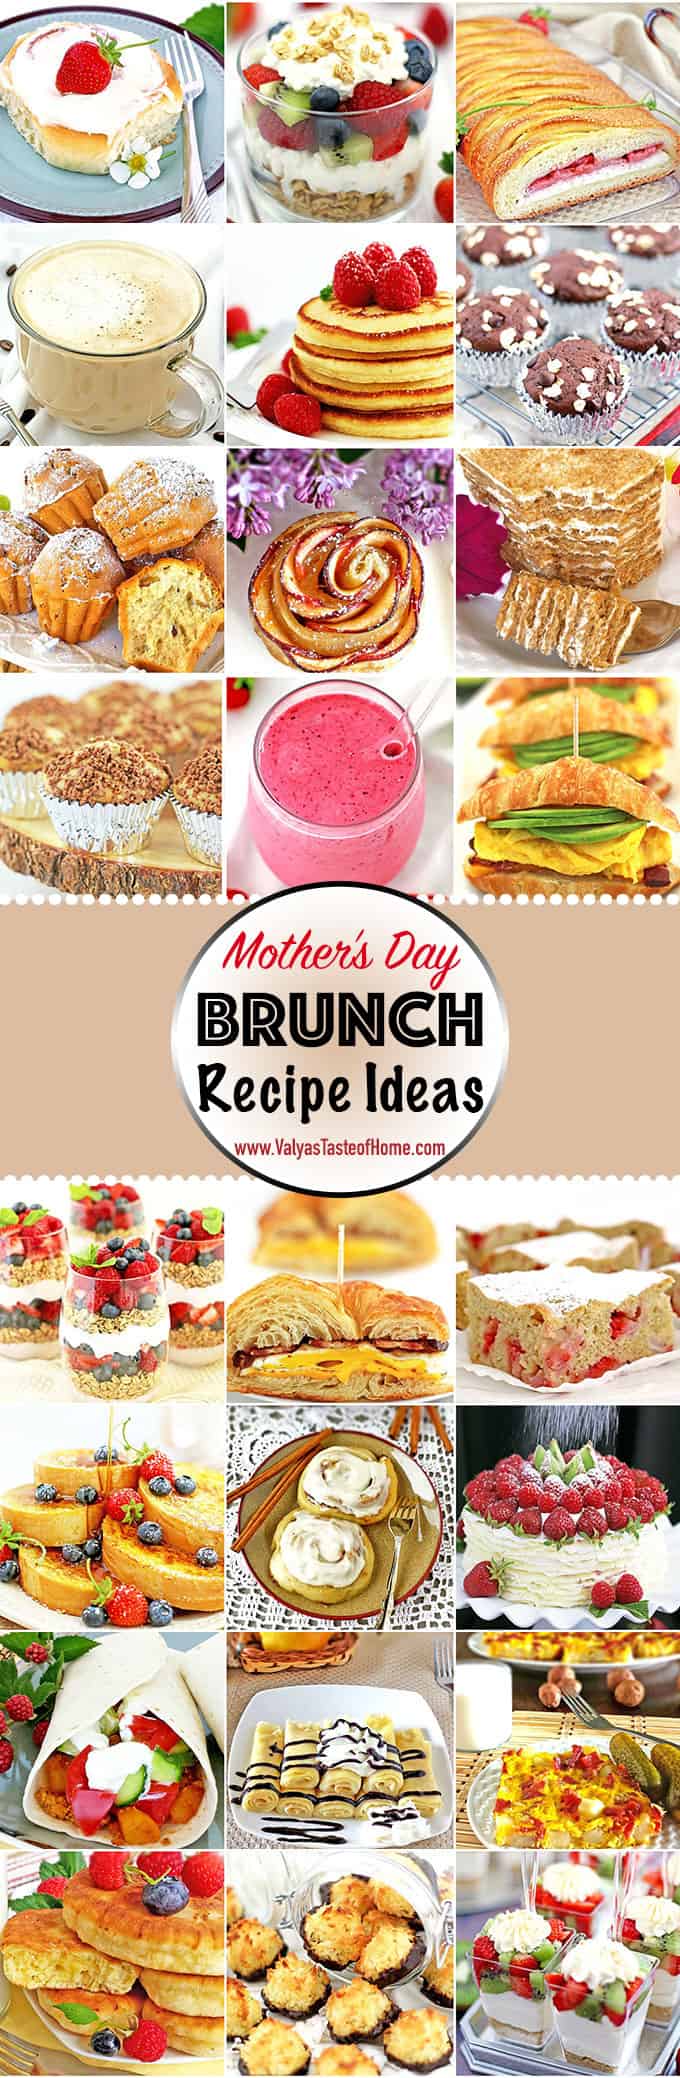 avocado, berries, Breakfast, breakfast burito, brunch, Cinnamon Rolls, crepes, crossandwiches, eggs, food, latte, moms day celebration, Mother’s Day Brunch Recipe Ideas, muffins, natural bacon, omelette, pancakes, parfaits, pastries, smoothie, smothie